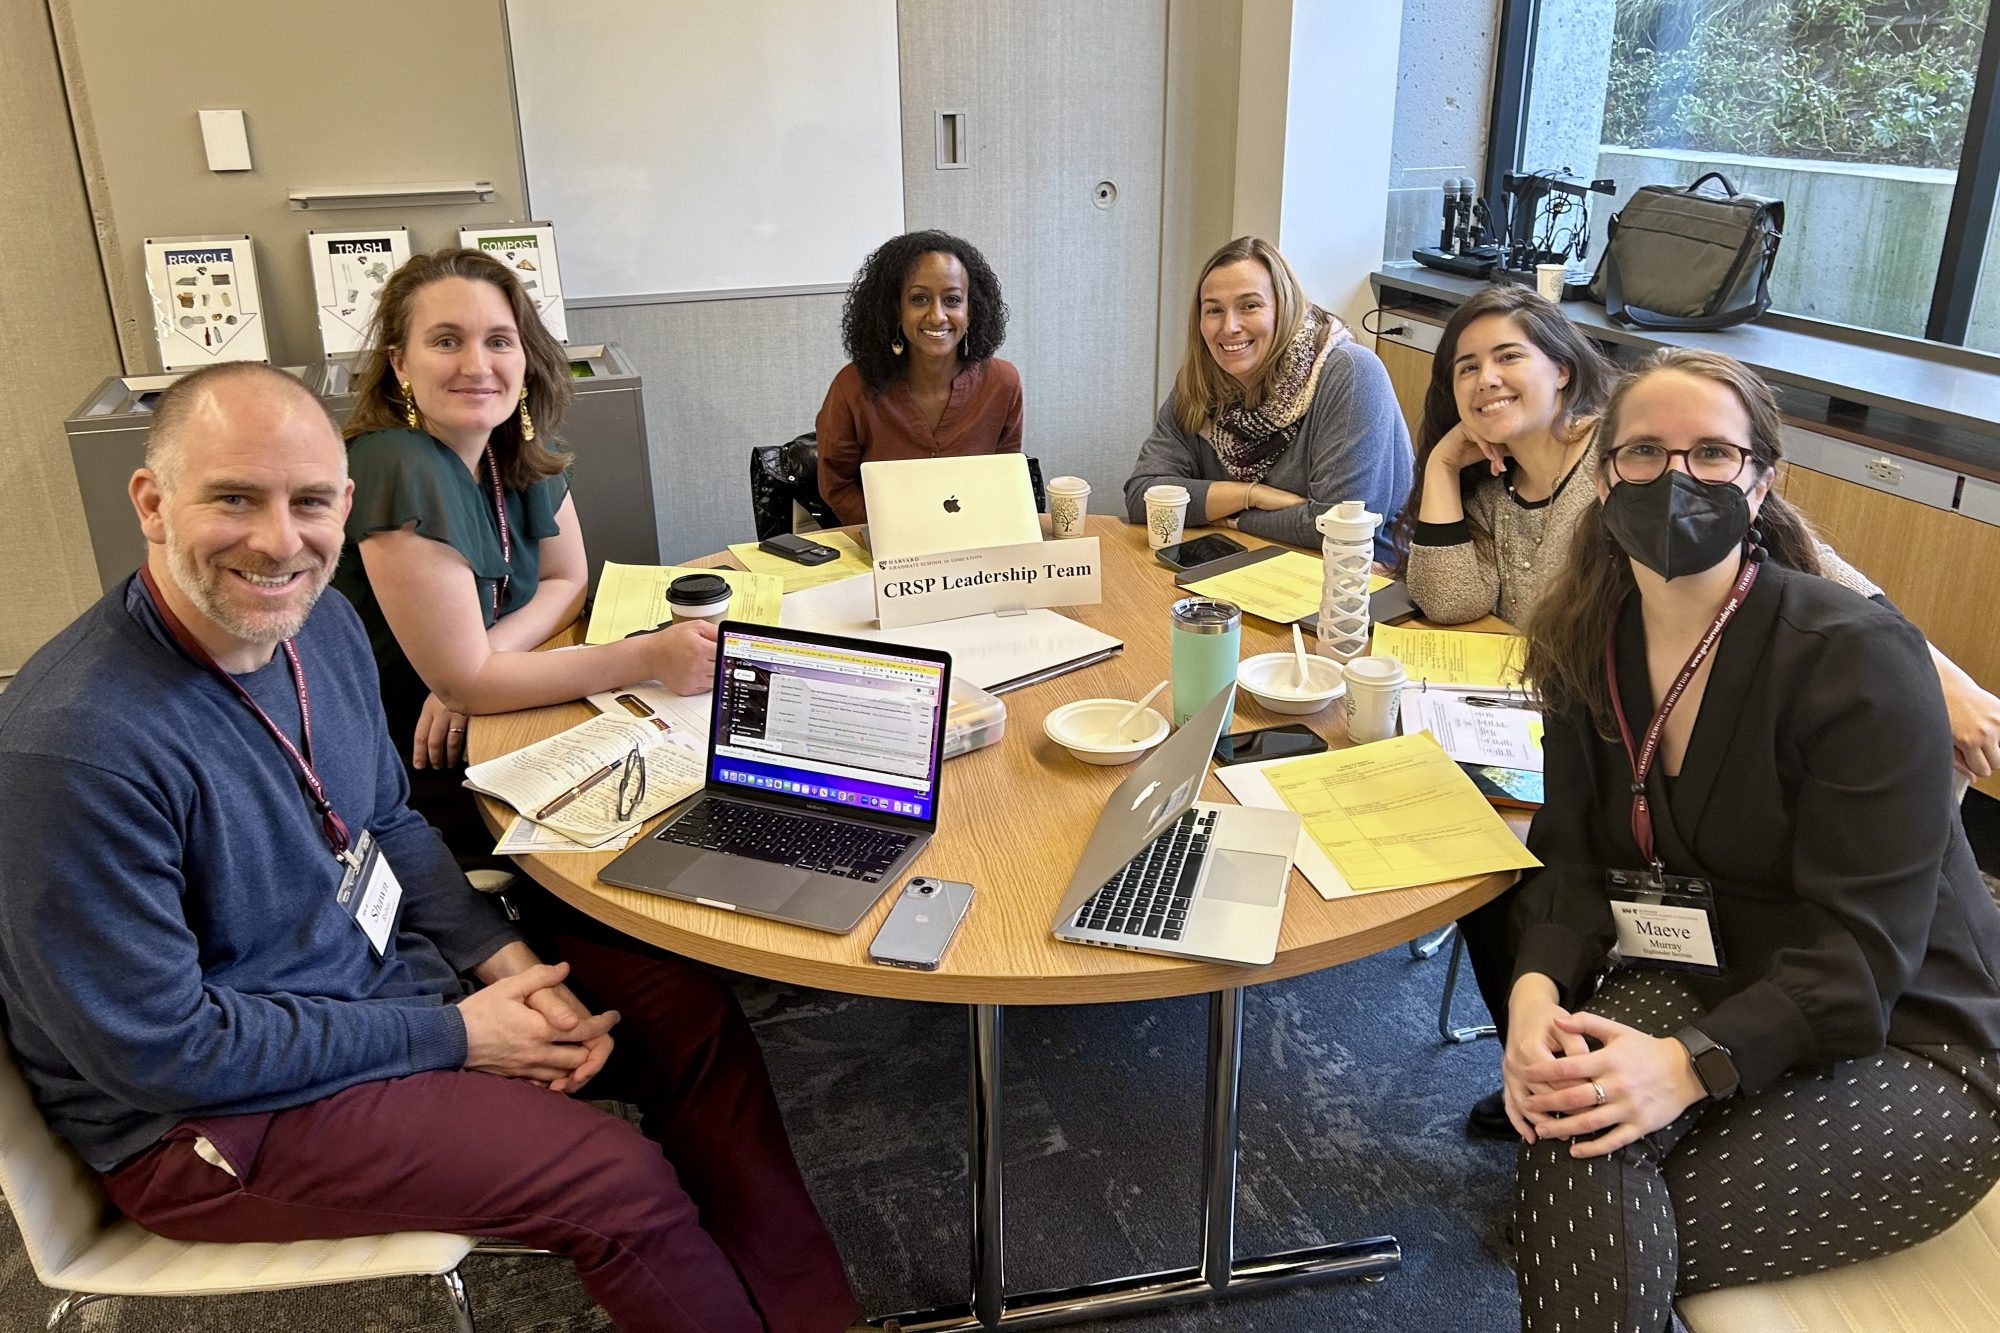 Members of Highlander Institute meet with their faculty advisor, Brittany Tabor Butler, during a Scaling For Impact Team Time session.